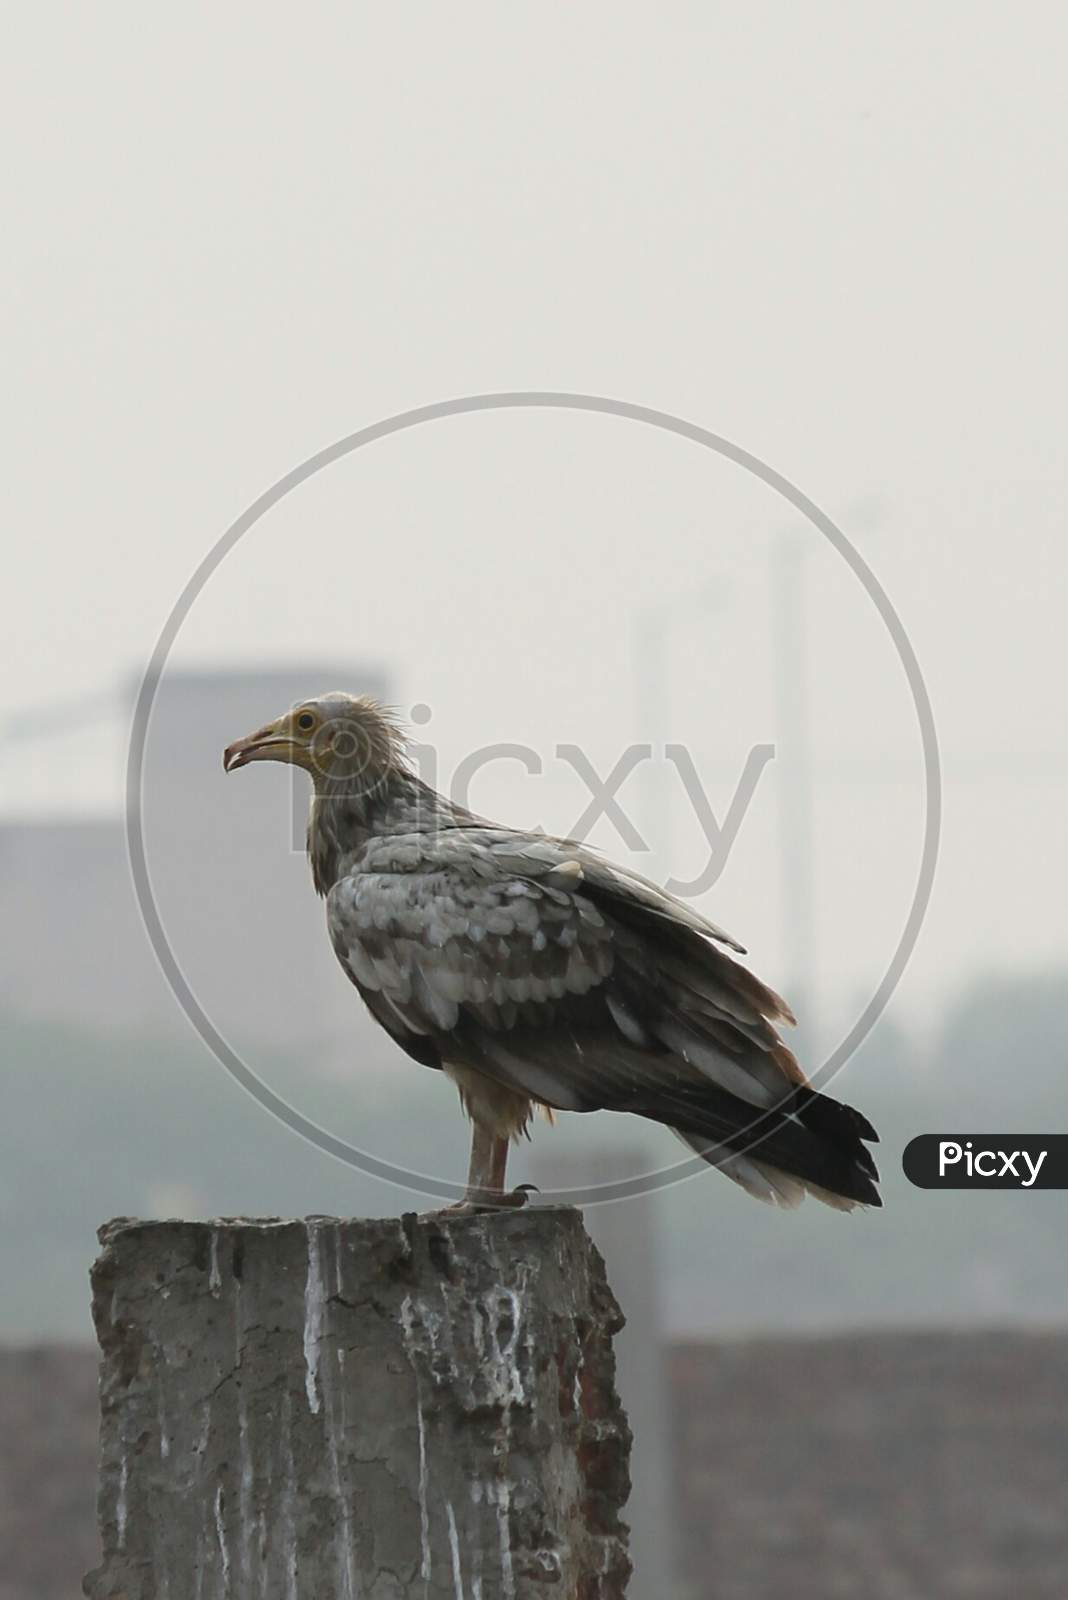 Egyptian Vulture also know as Prophet's chicken.